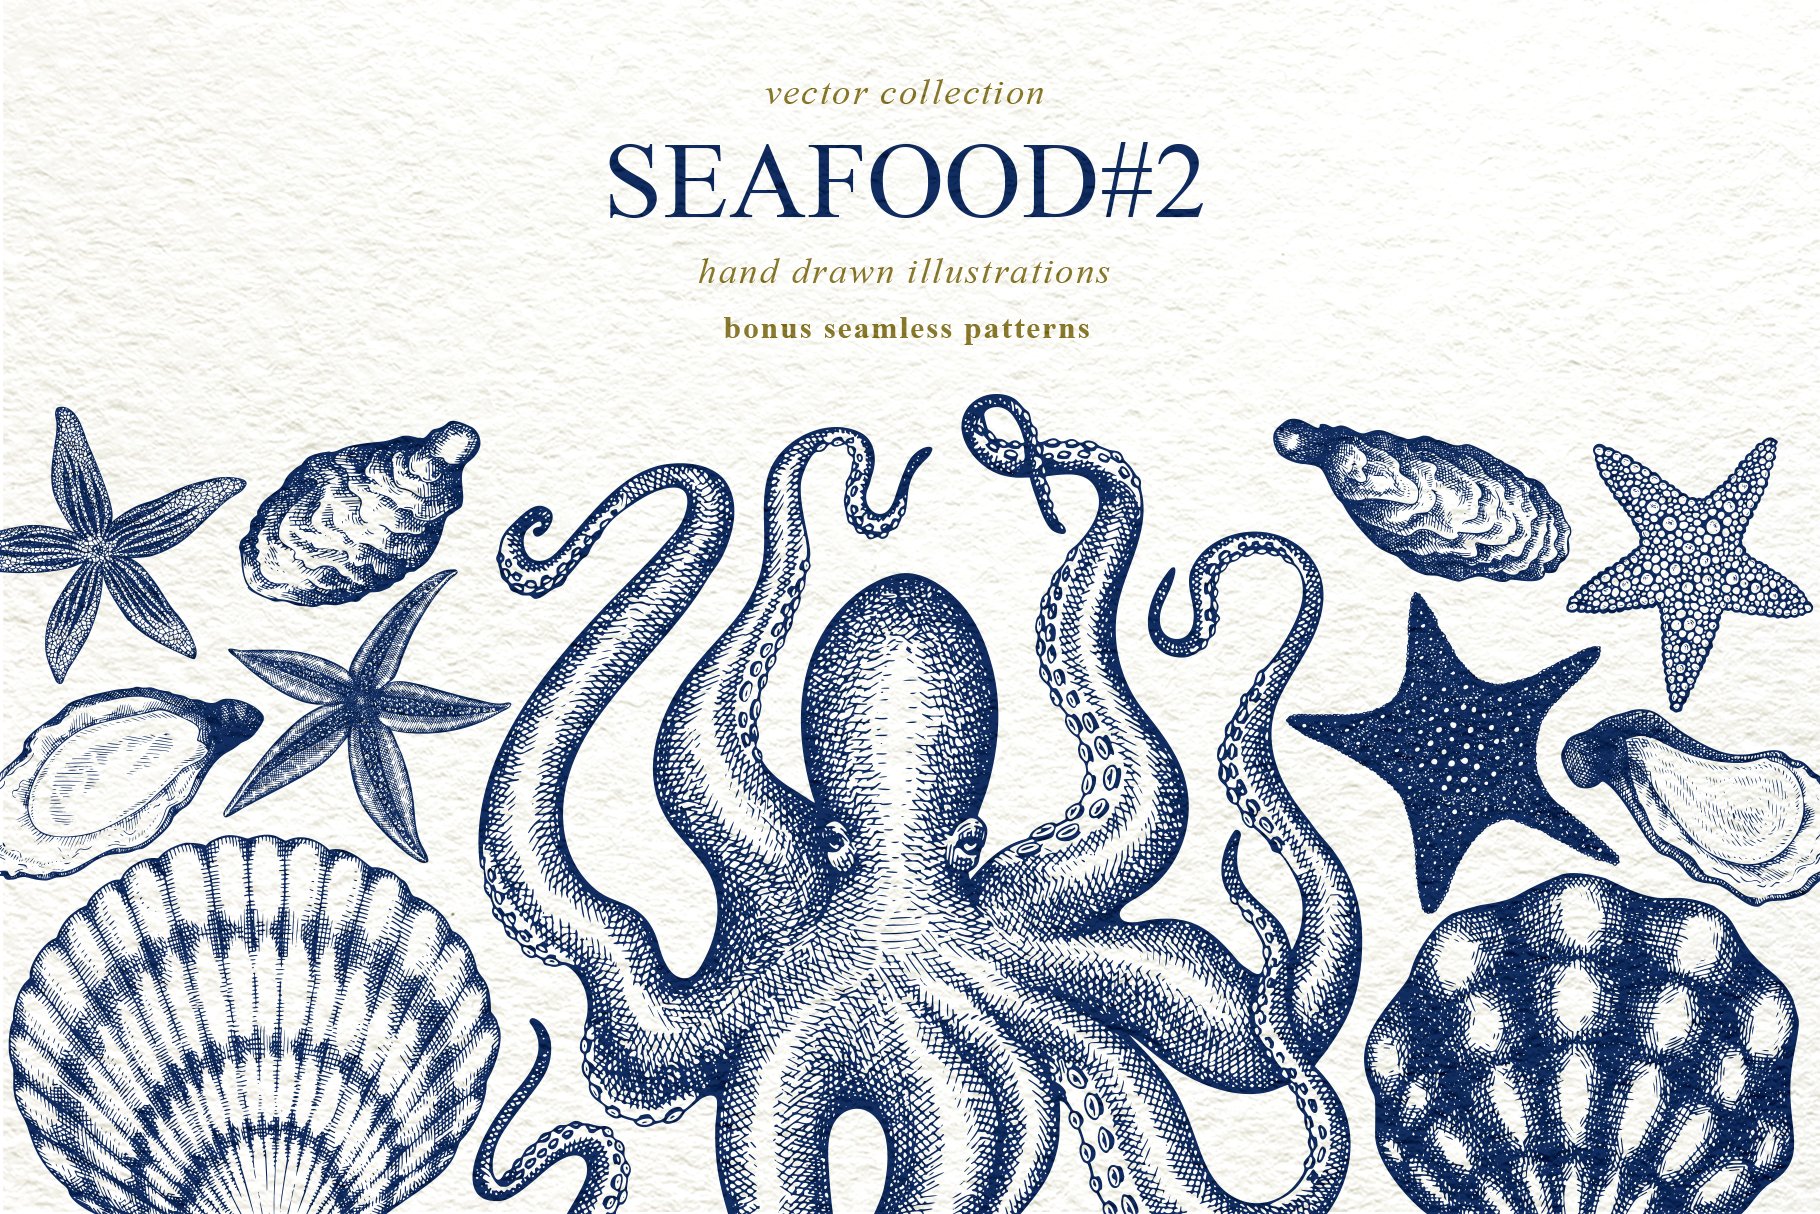 Seafood Vector Collection #2 cover image.